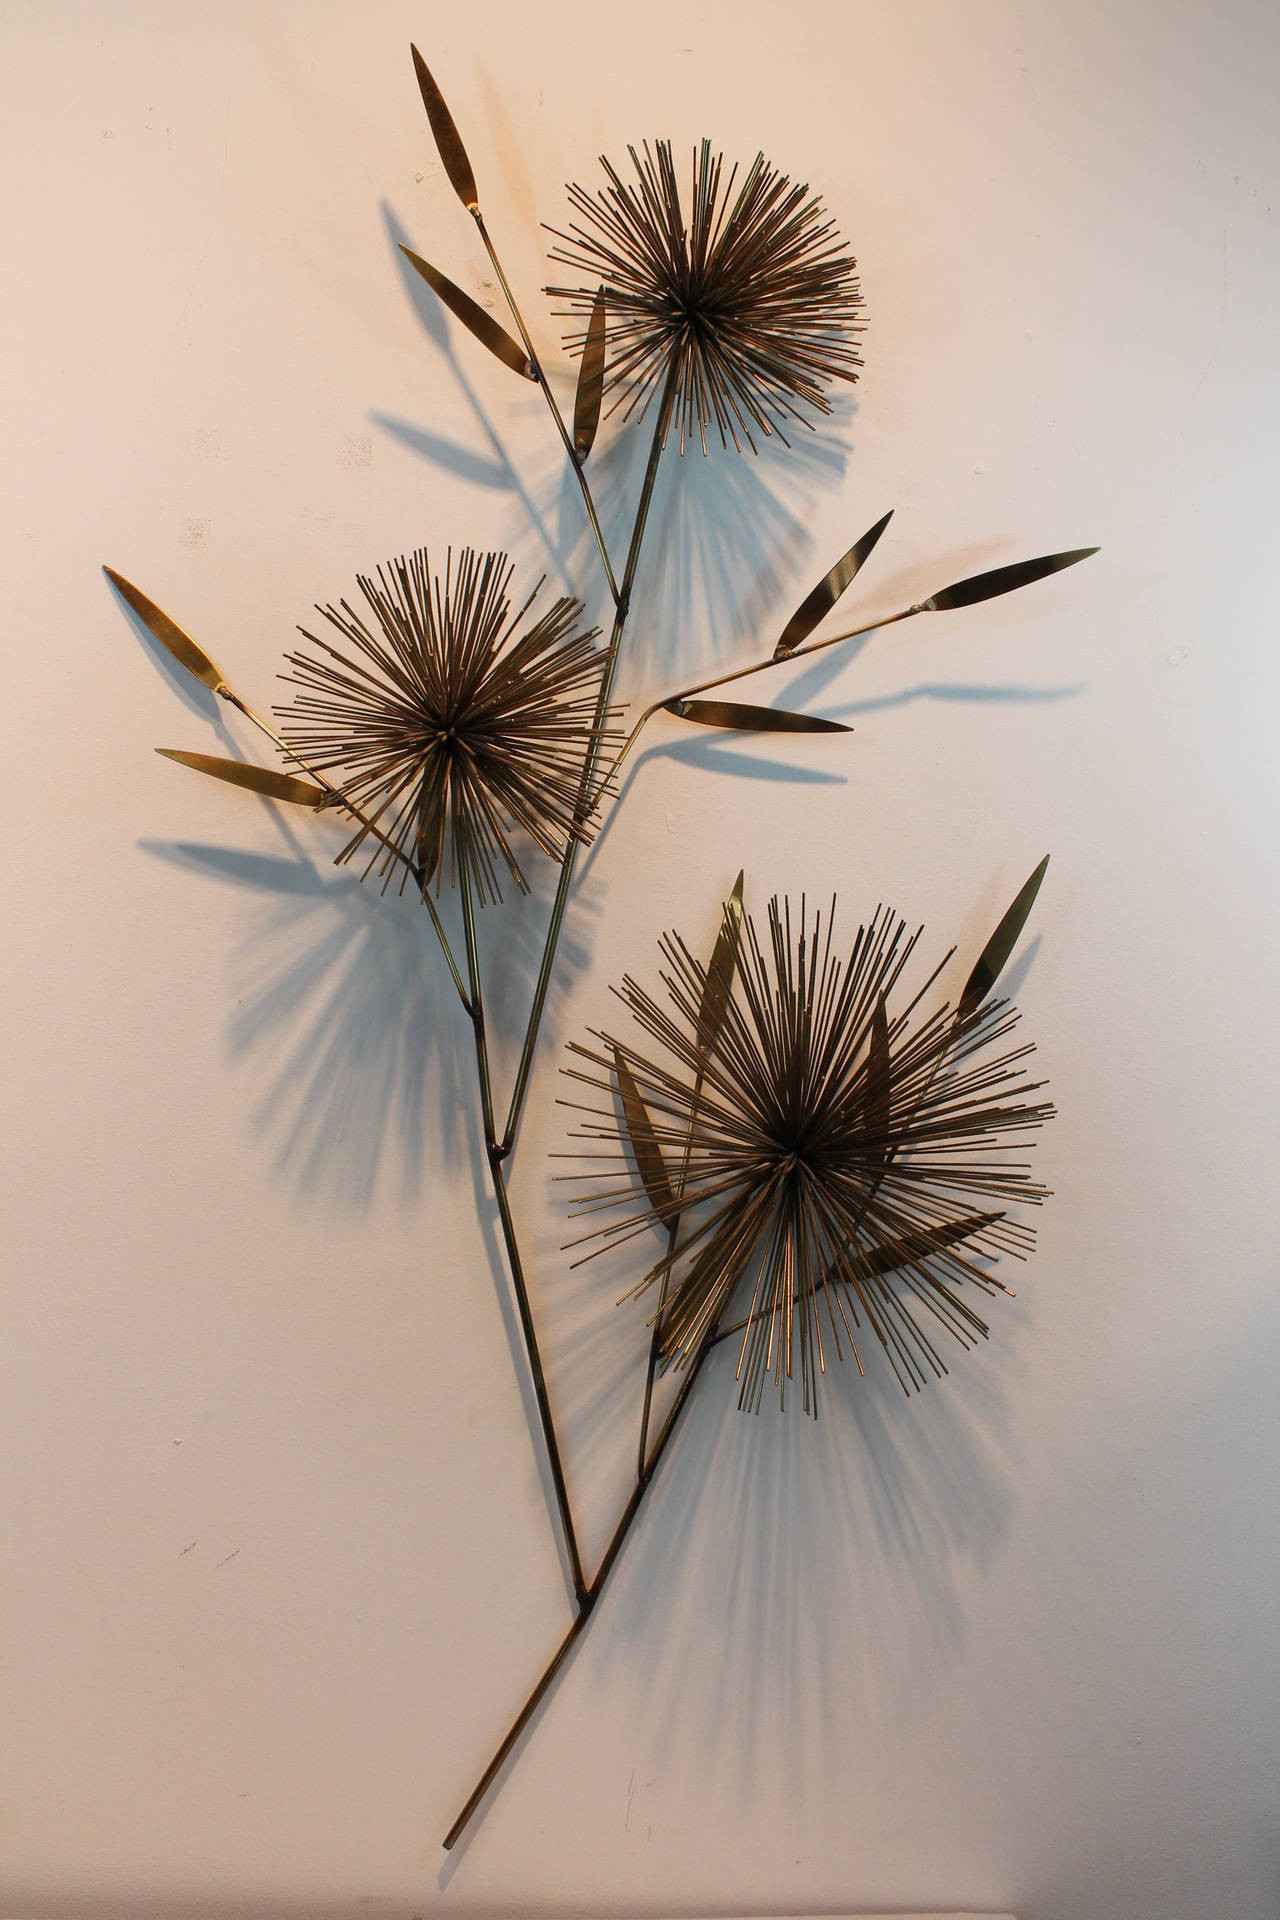 Great line and graphic form on this signed C. Jere brass pom pom sunburst flower form wall sculpture.